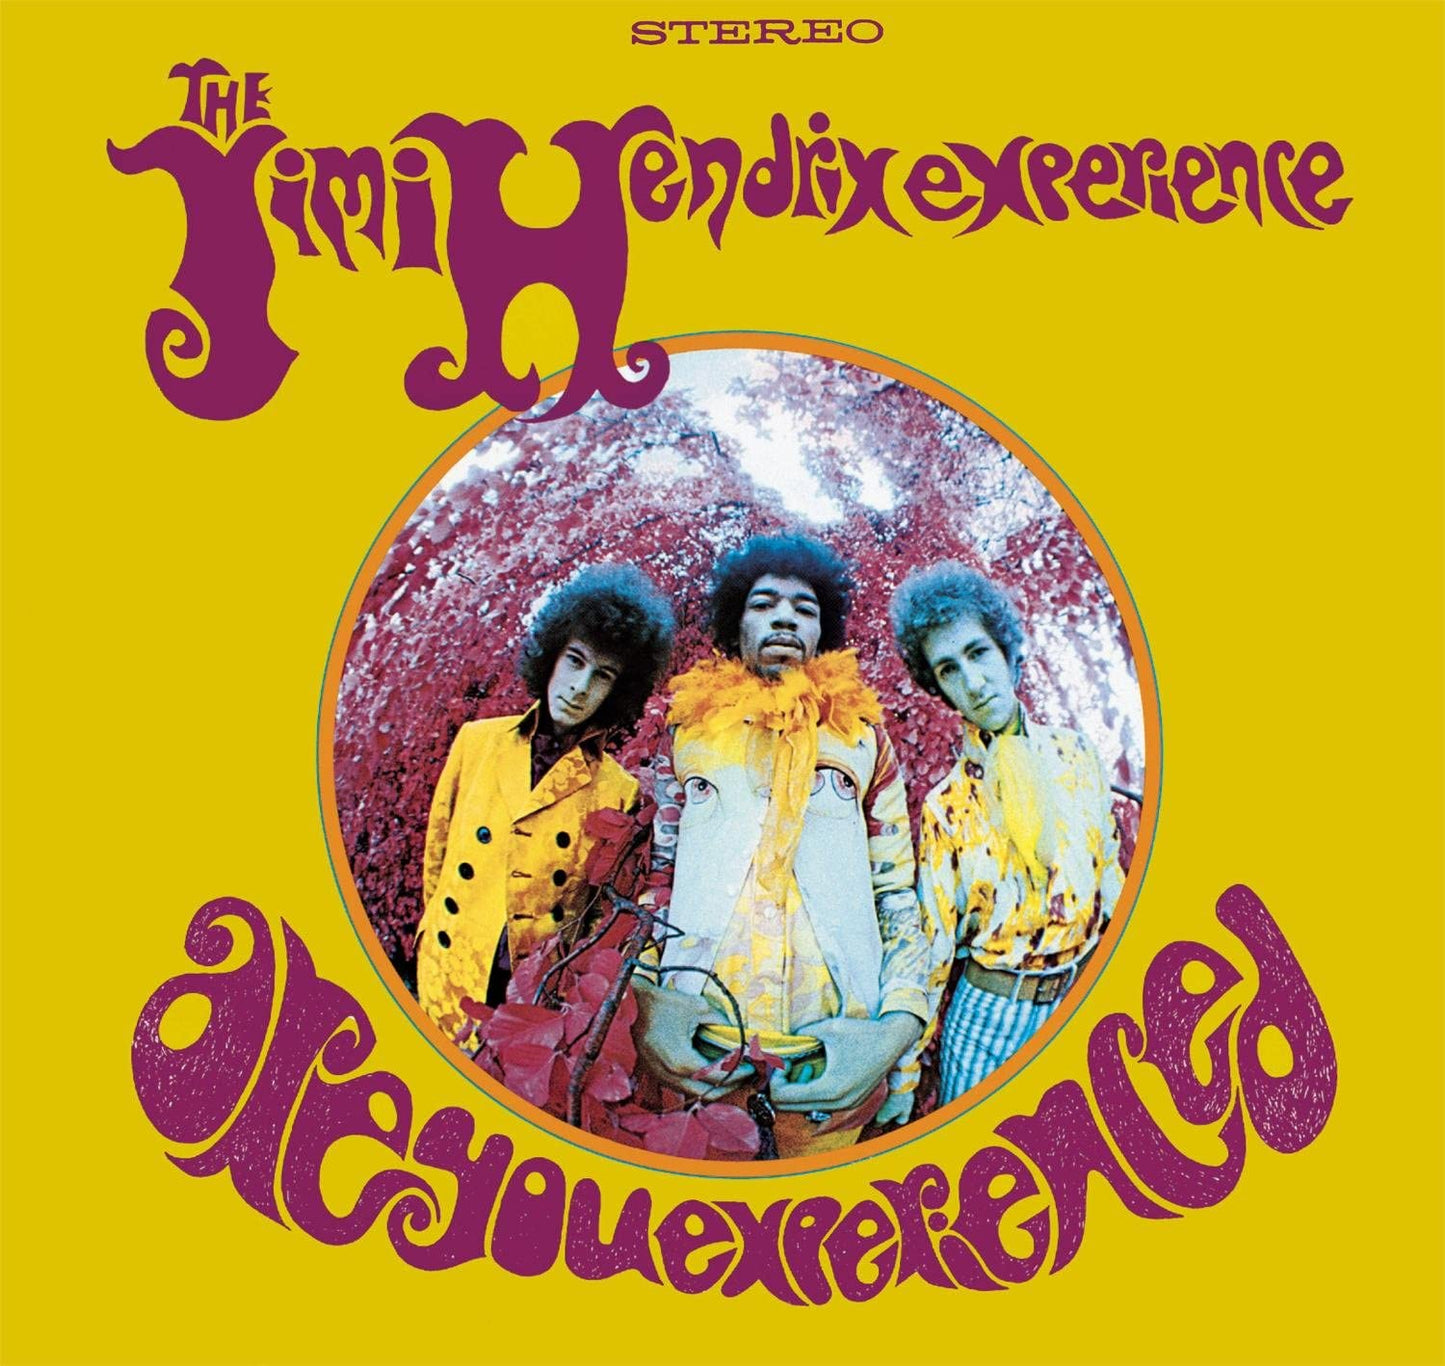 CD/DVD - Jimi Hendrix - Are You Experienced